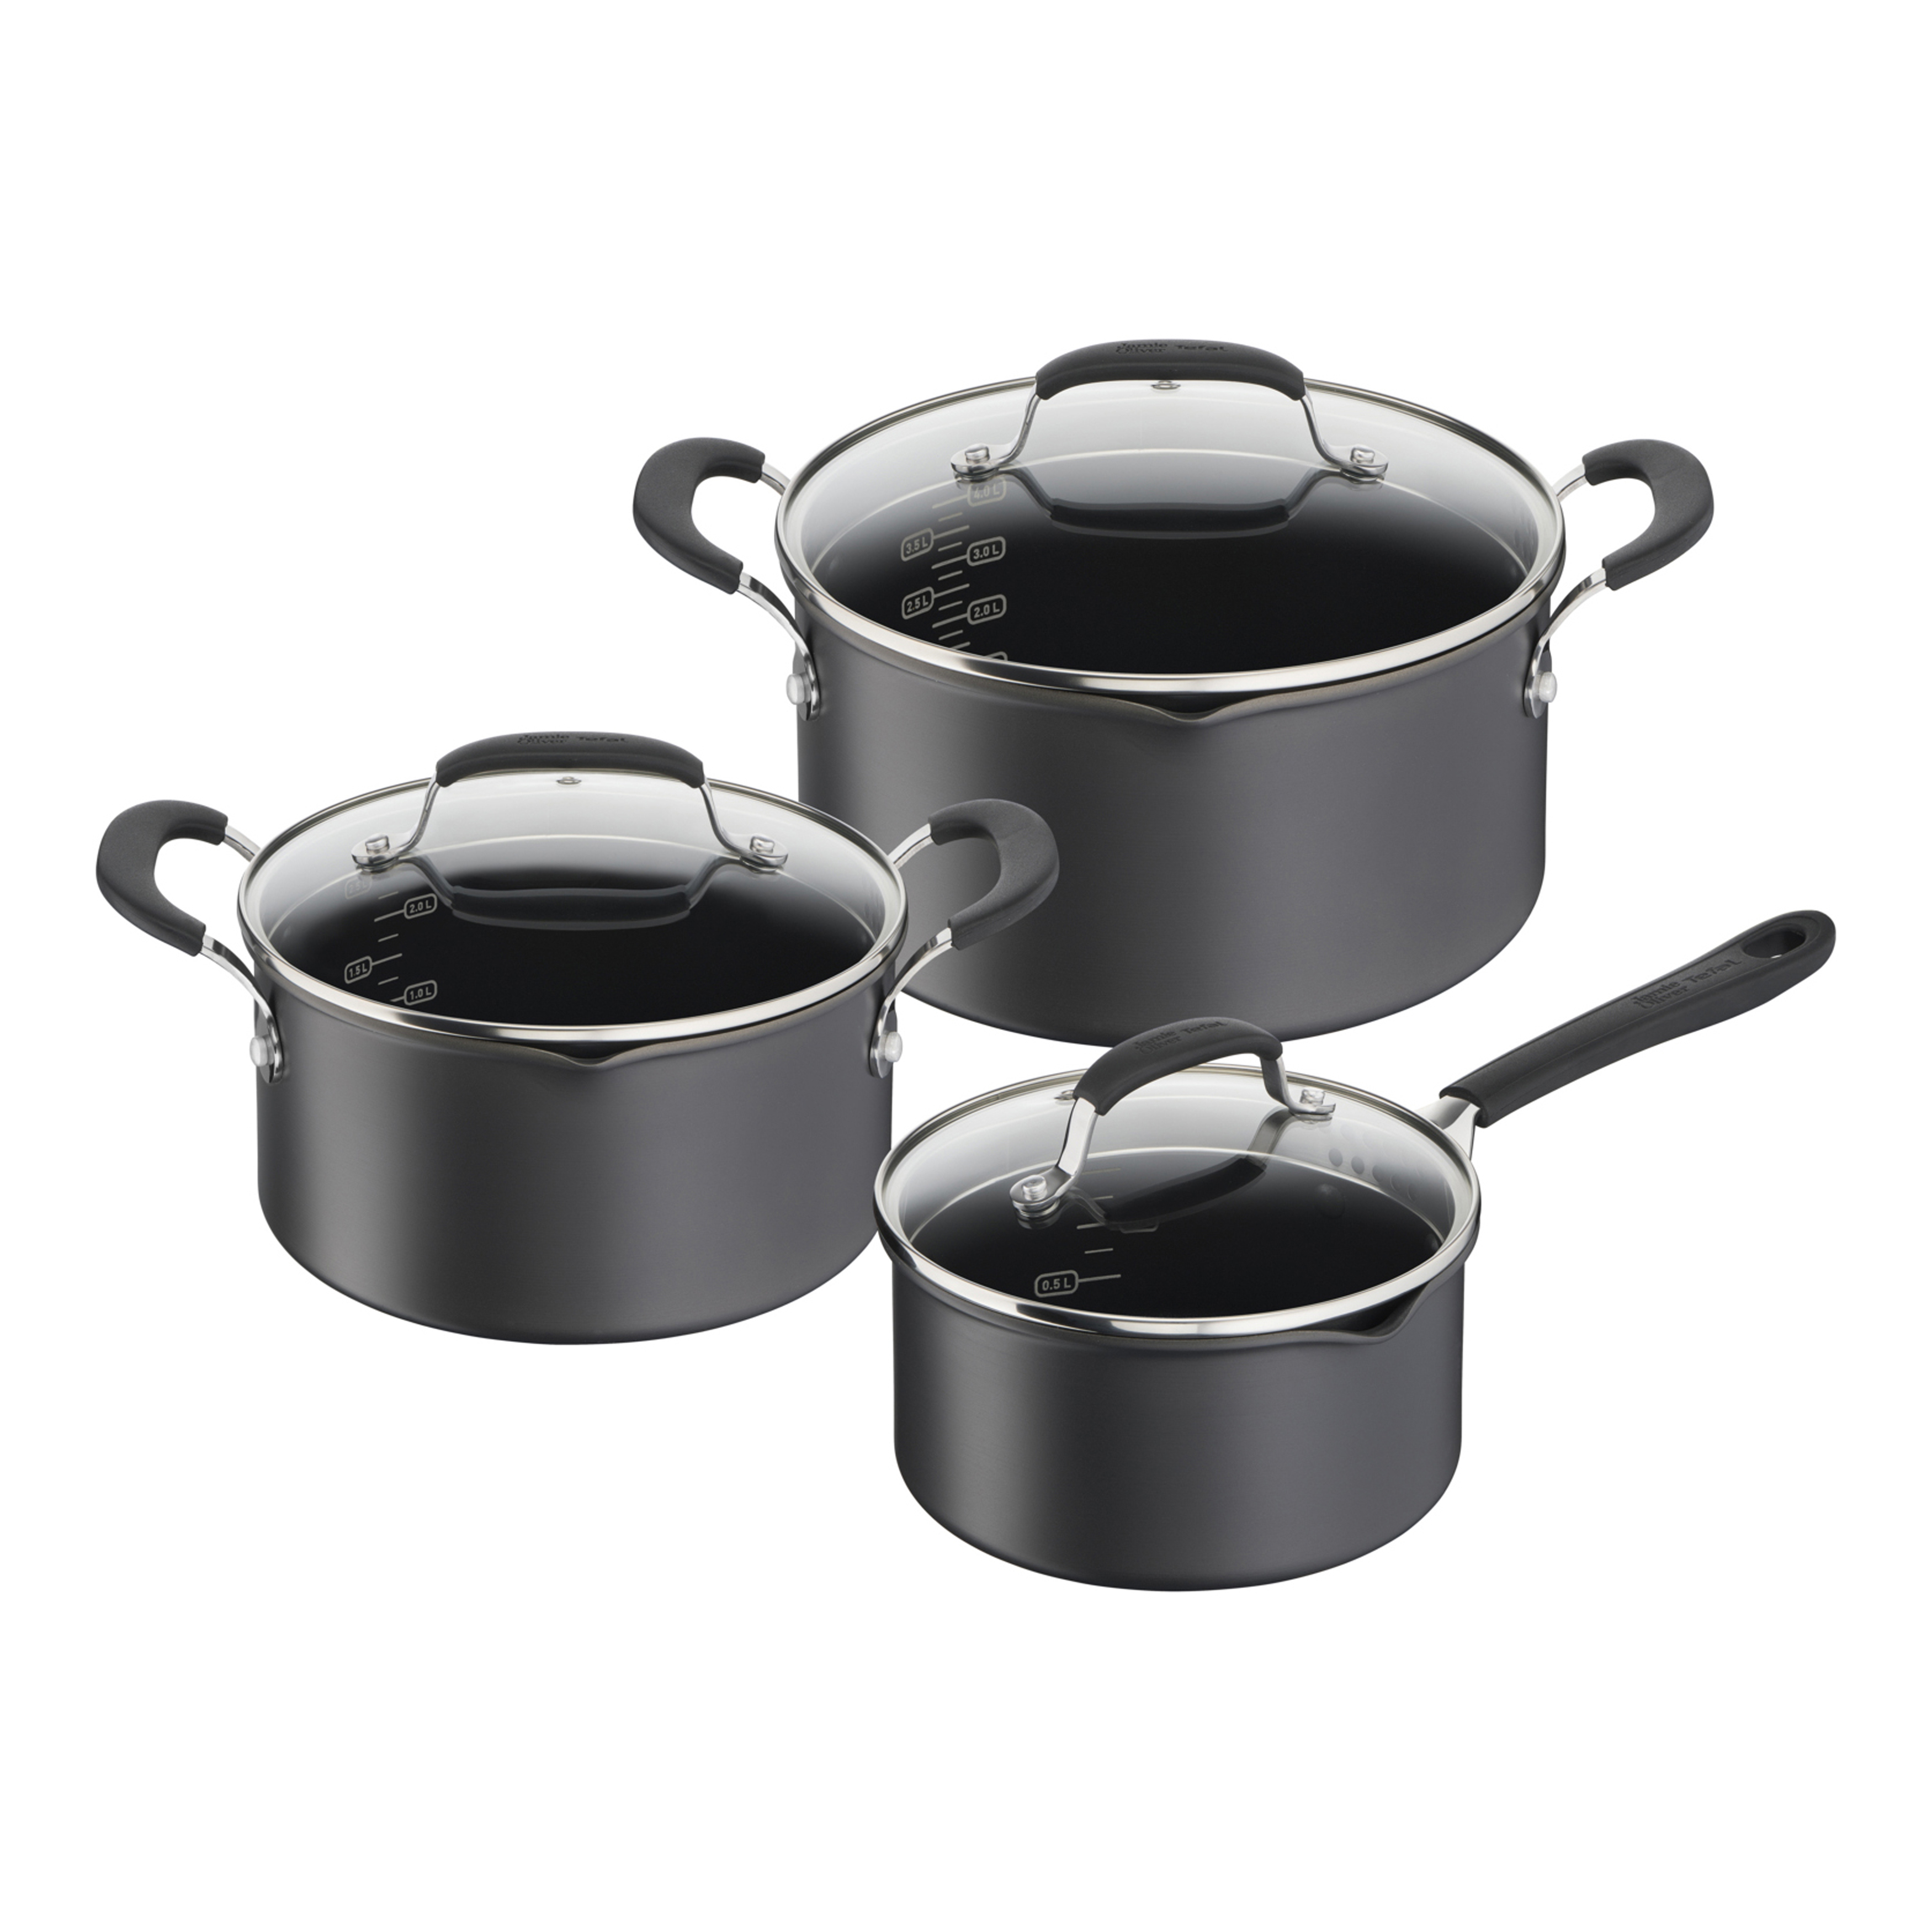 pieces & Easy sauce set pan 6 Quick Oliver Jamie from Tefal